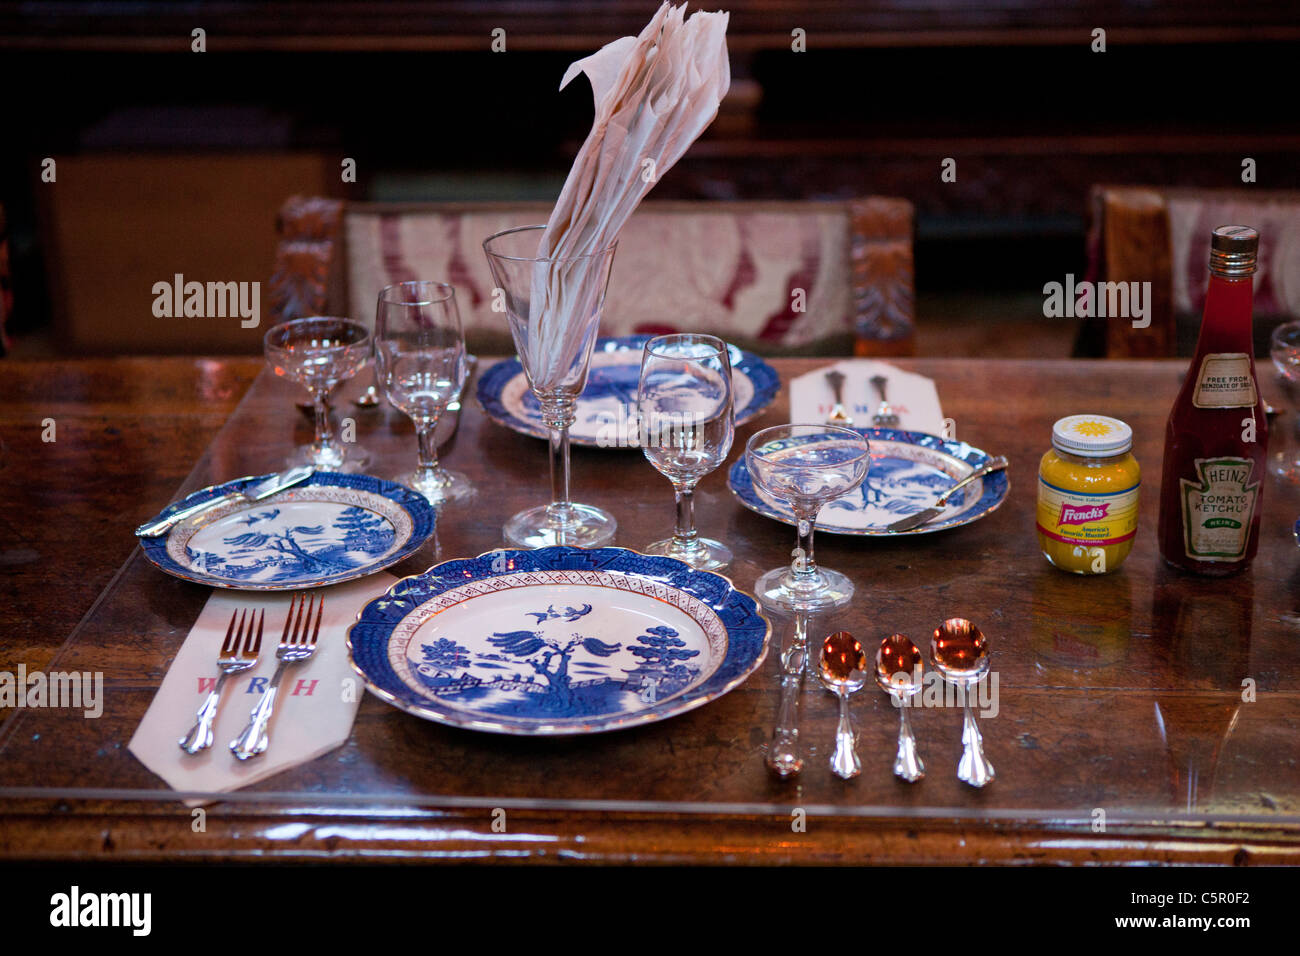 Placing setting in the dining room, Casa Grande, Hearst Castle, San Simeon, California, United States of America Stock Photo